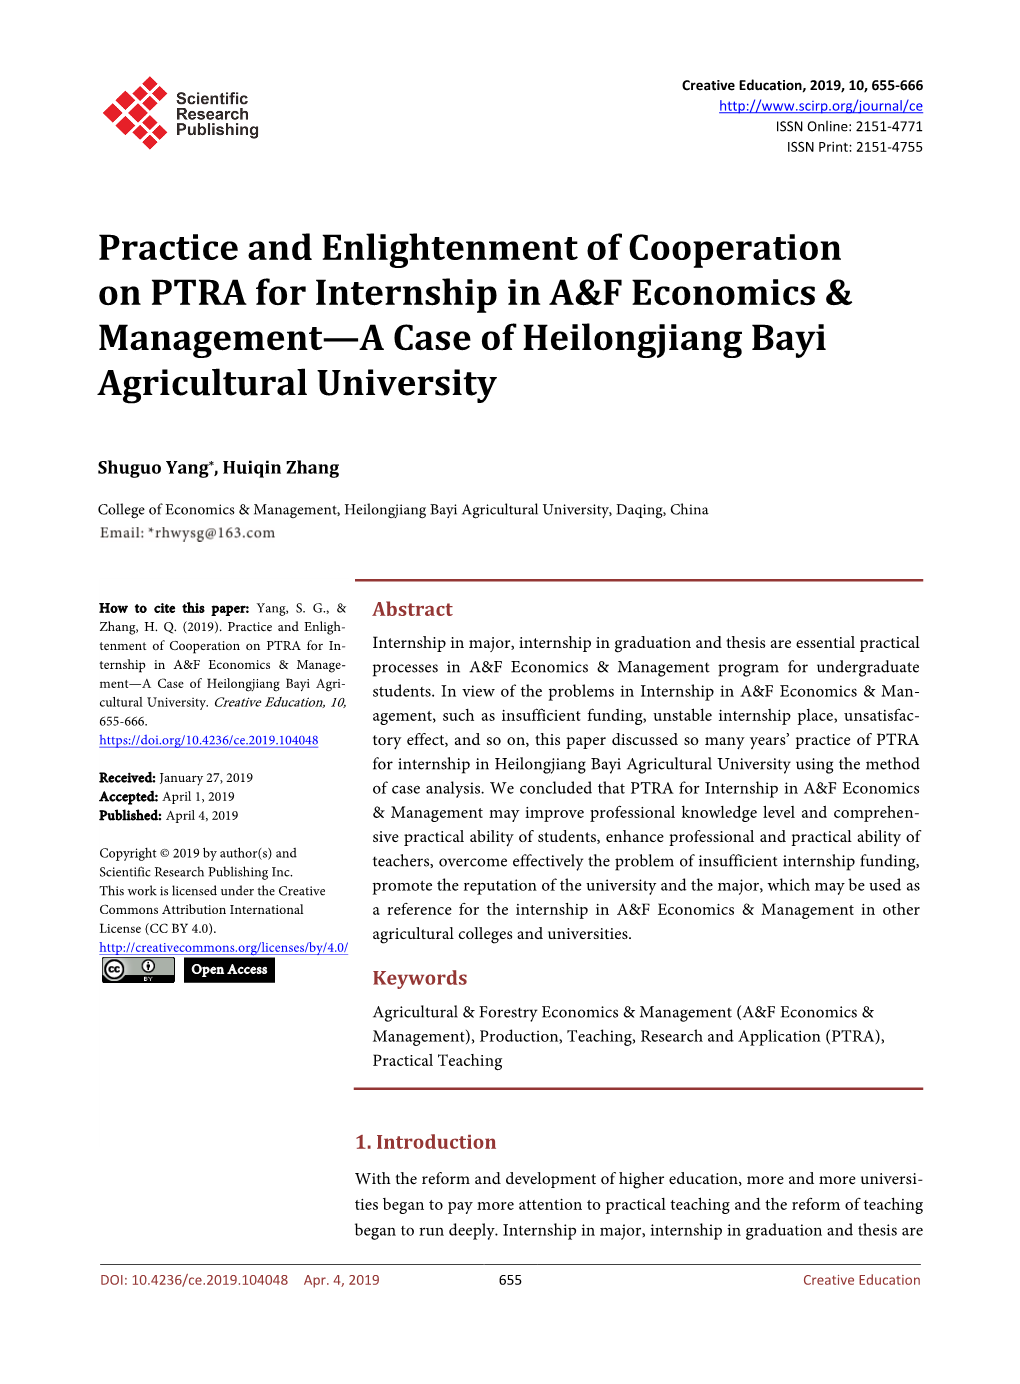 Practice and Enlightenment of Cooperation on PTRA for Internship in A&F Economics & Management—A Case of Heilongjiang Bayi Agricultural University